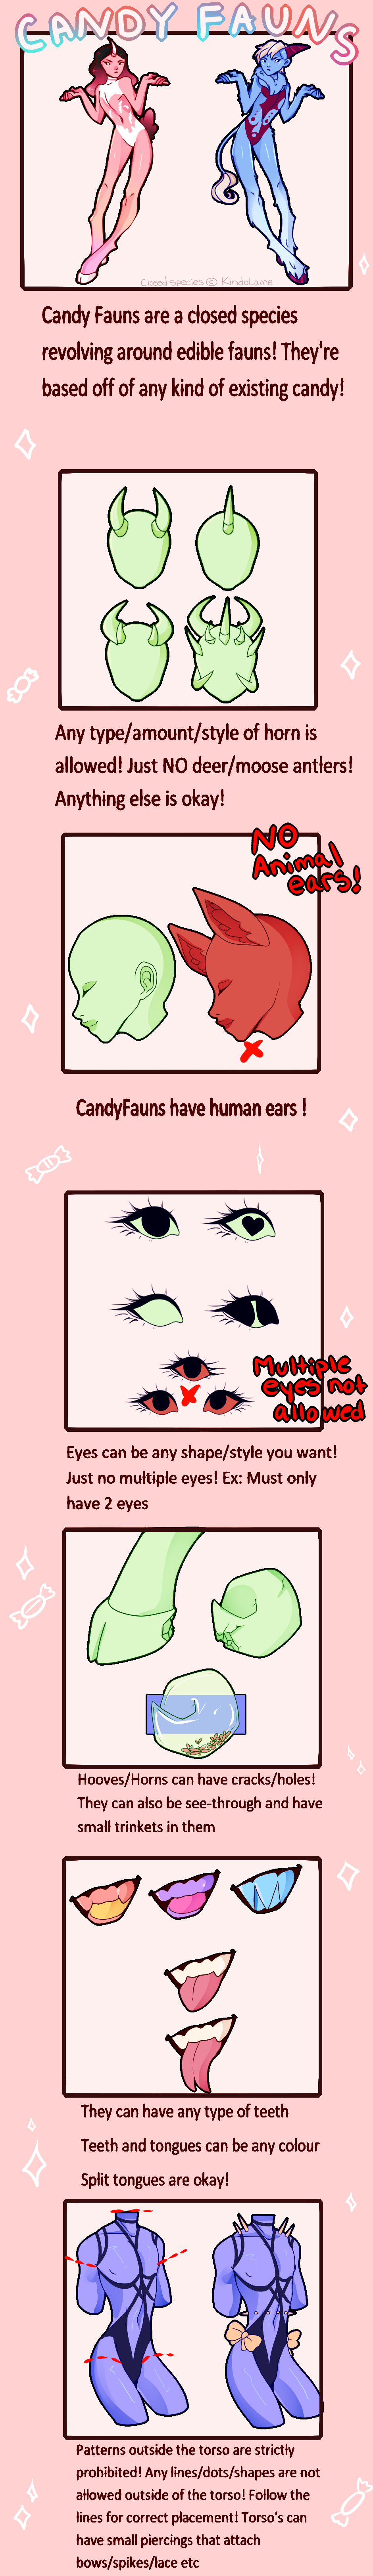 Candy Fauns Trait Sheet by KindoLame on DeviantArt